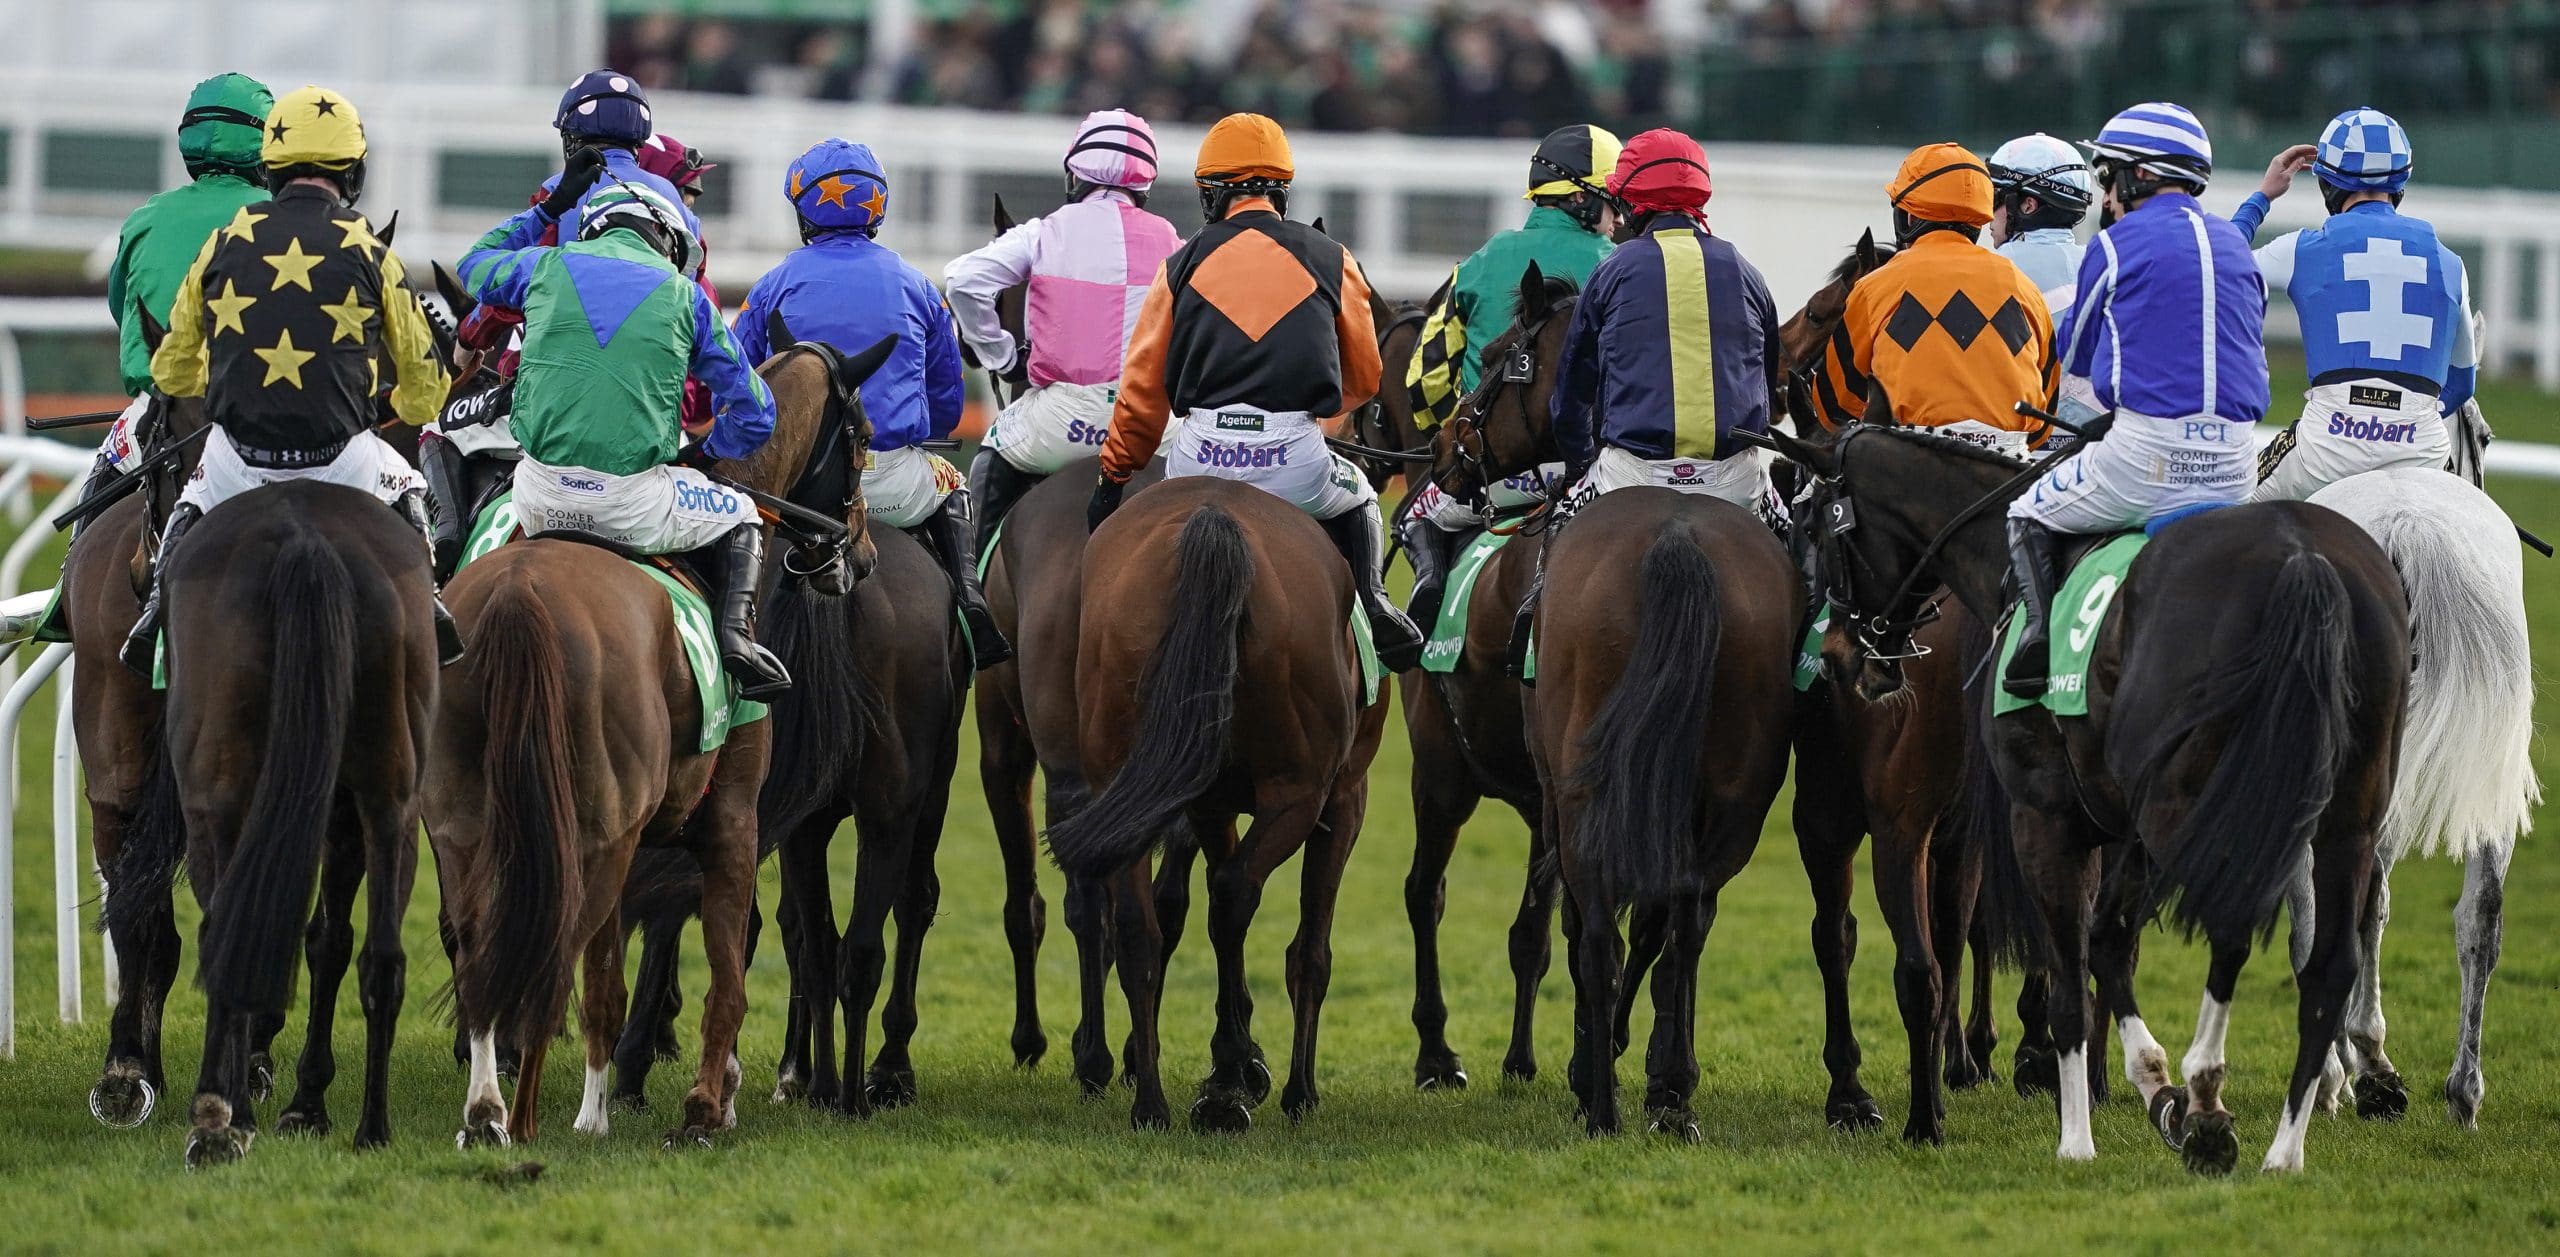 Racing Tips For Newmarket Hosted Racing Events Newsboy selections for day!